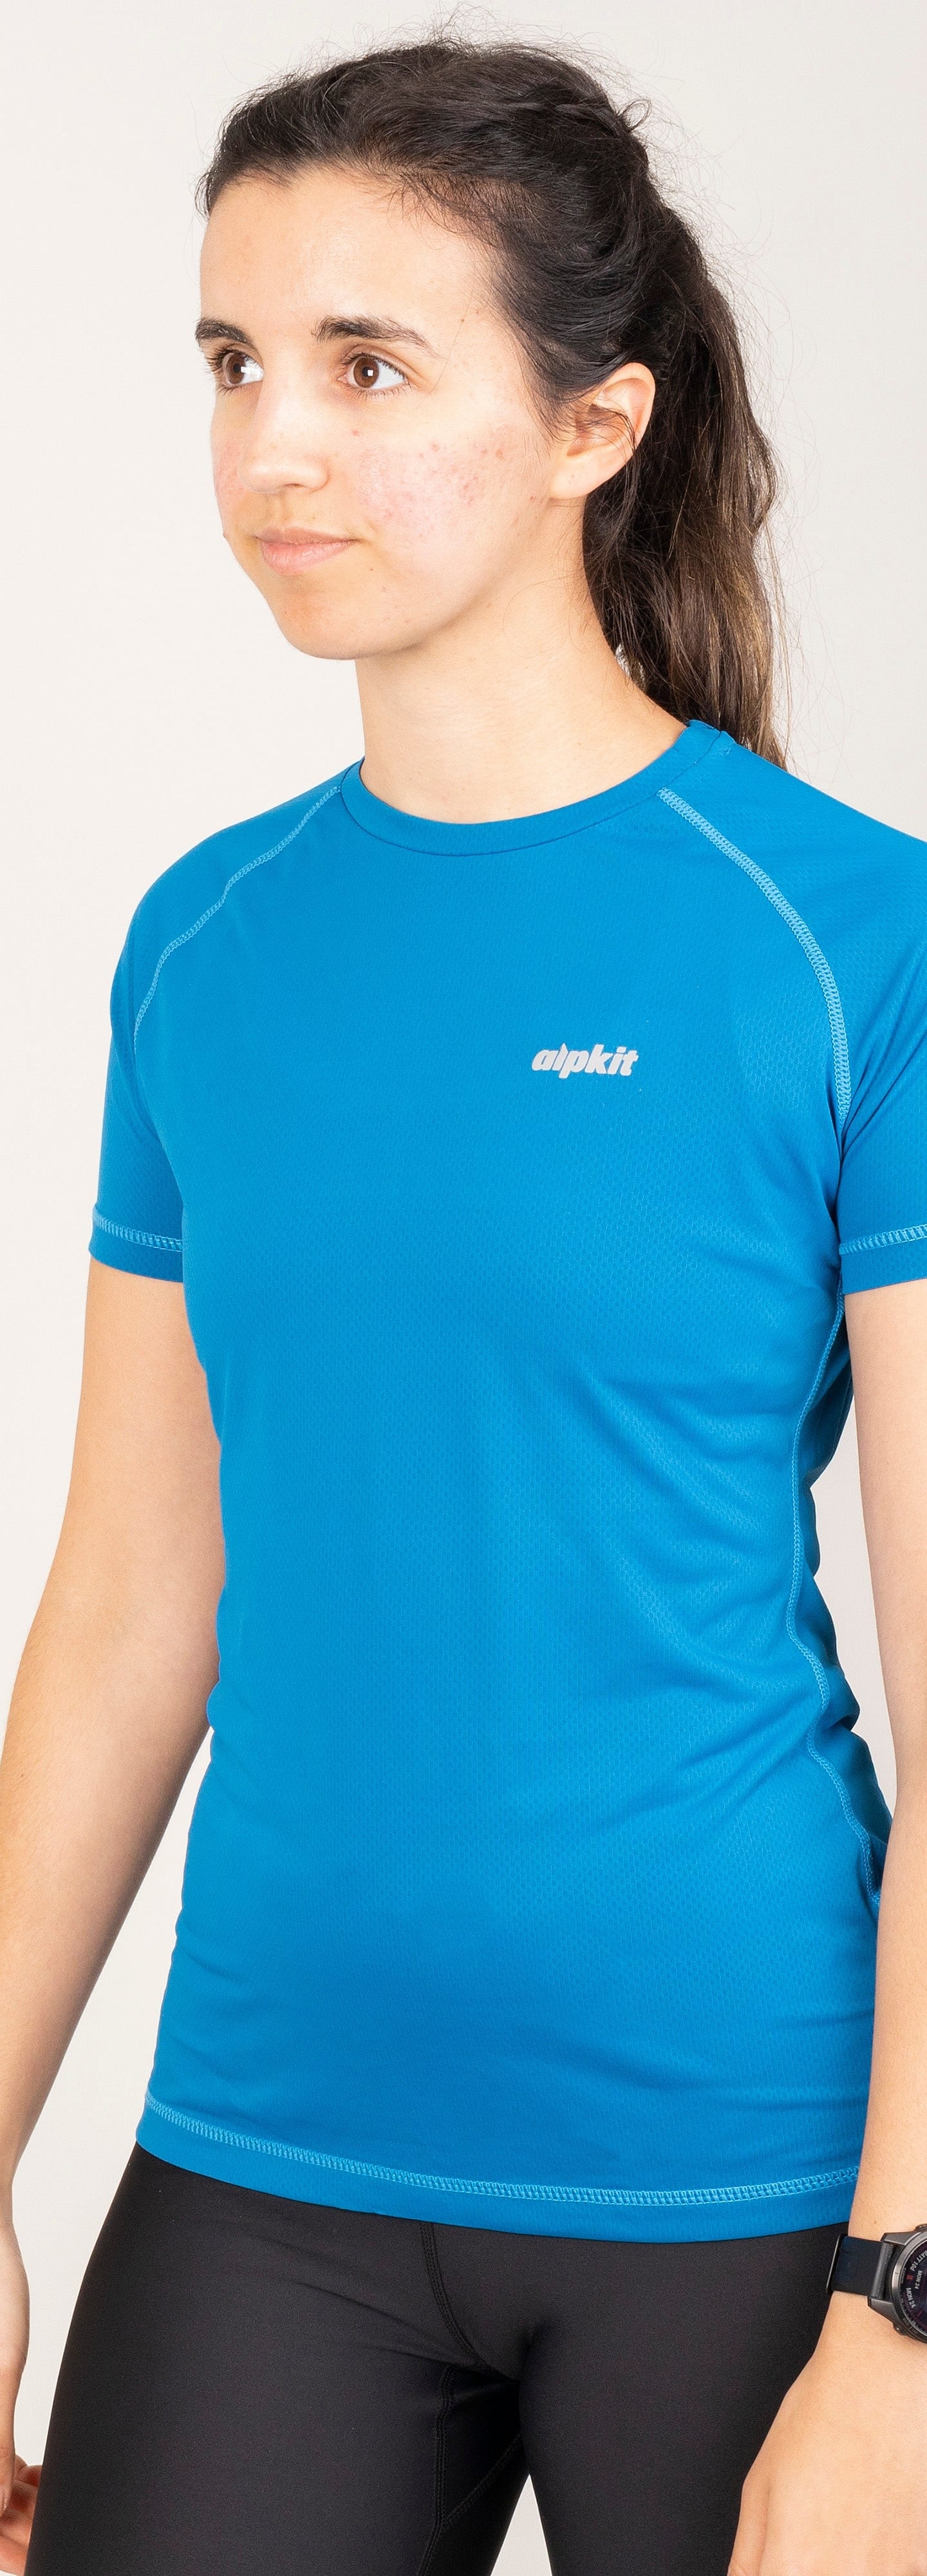 Womens High Performance Base Layer 100% Recycled Fabric